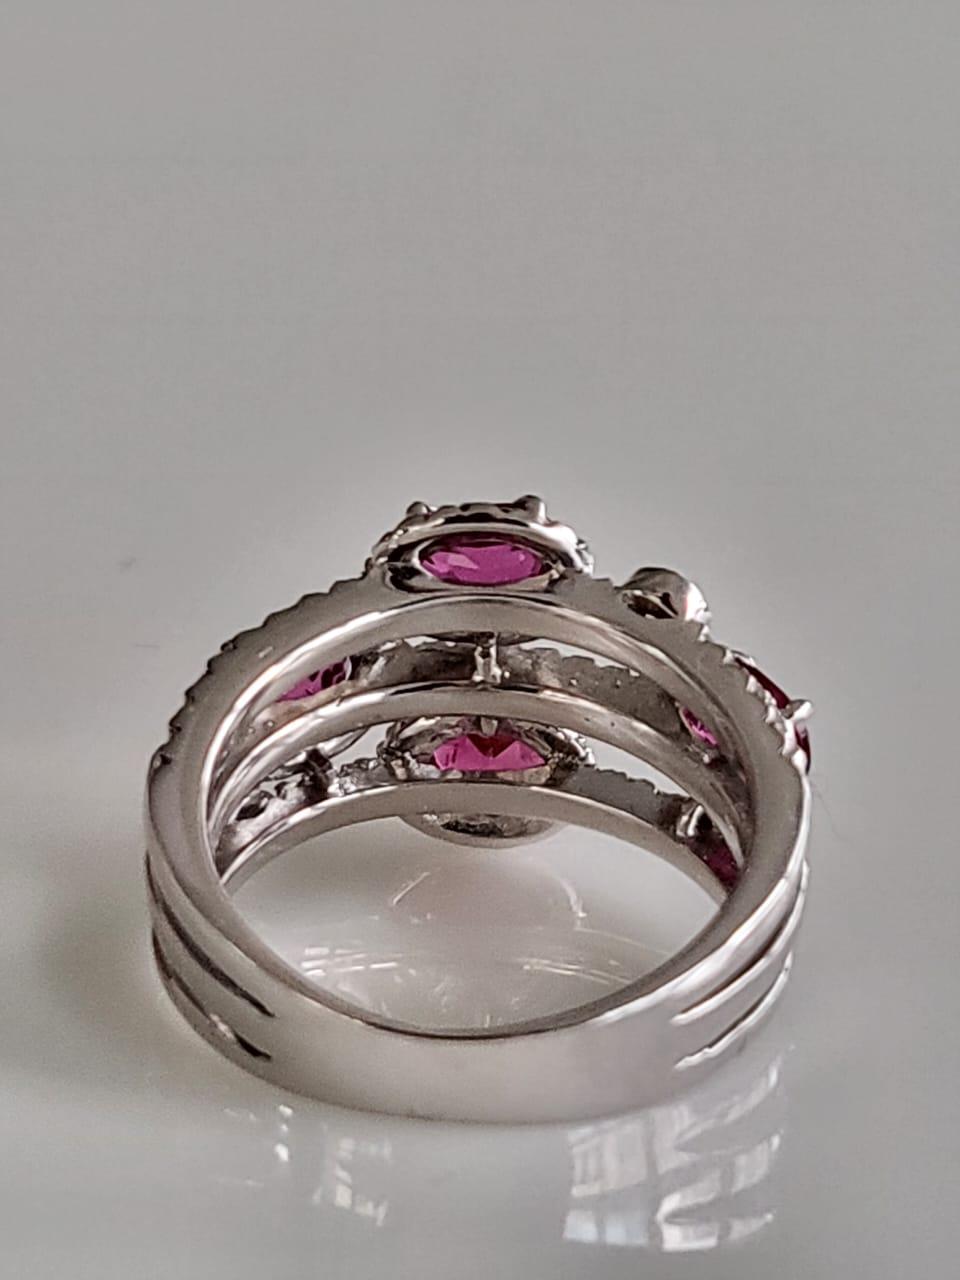 Modern Set in 18k Gold, 1.41 Carats, Rubellite & Diamonds Engagement / Cocktail Ring For Sale